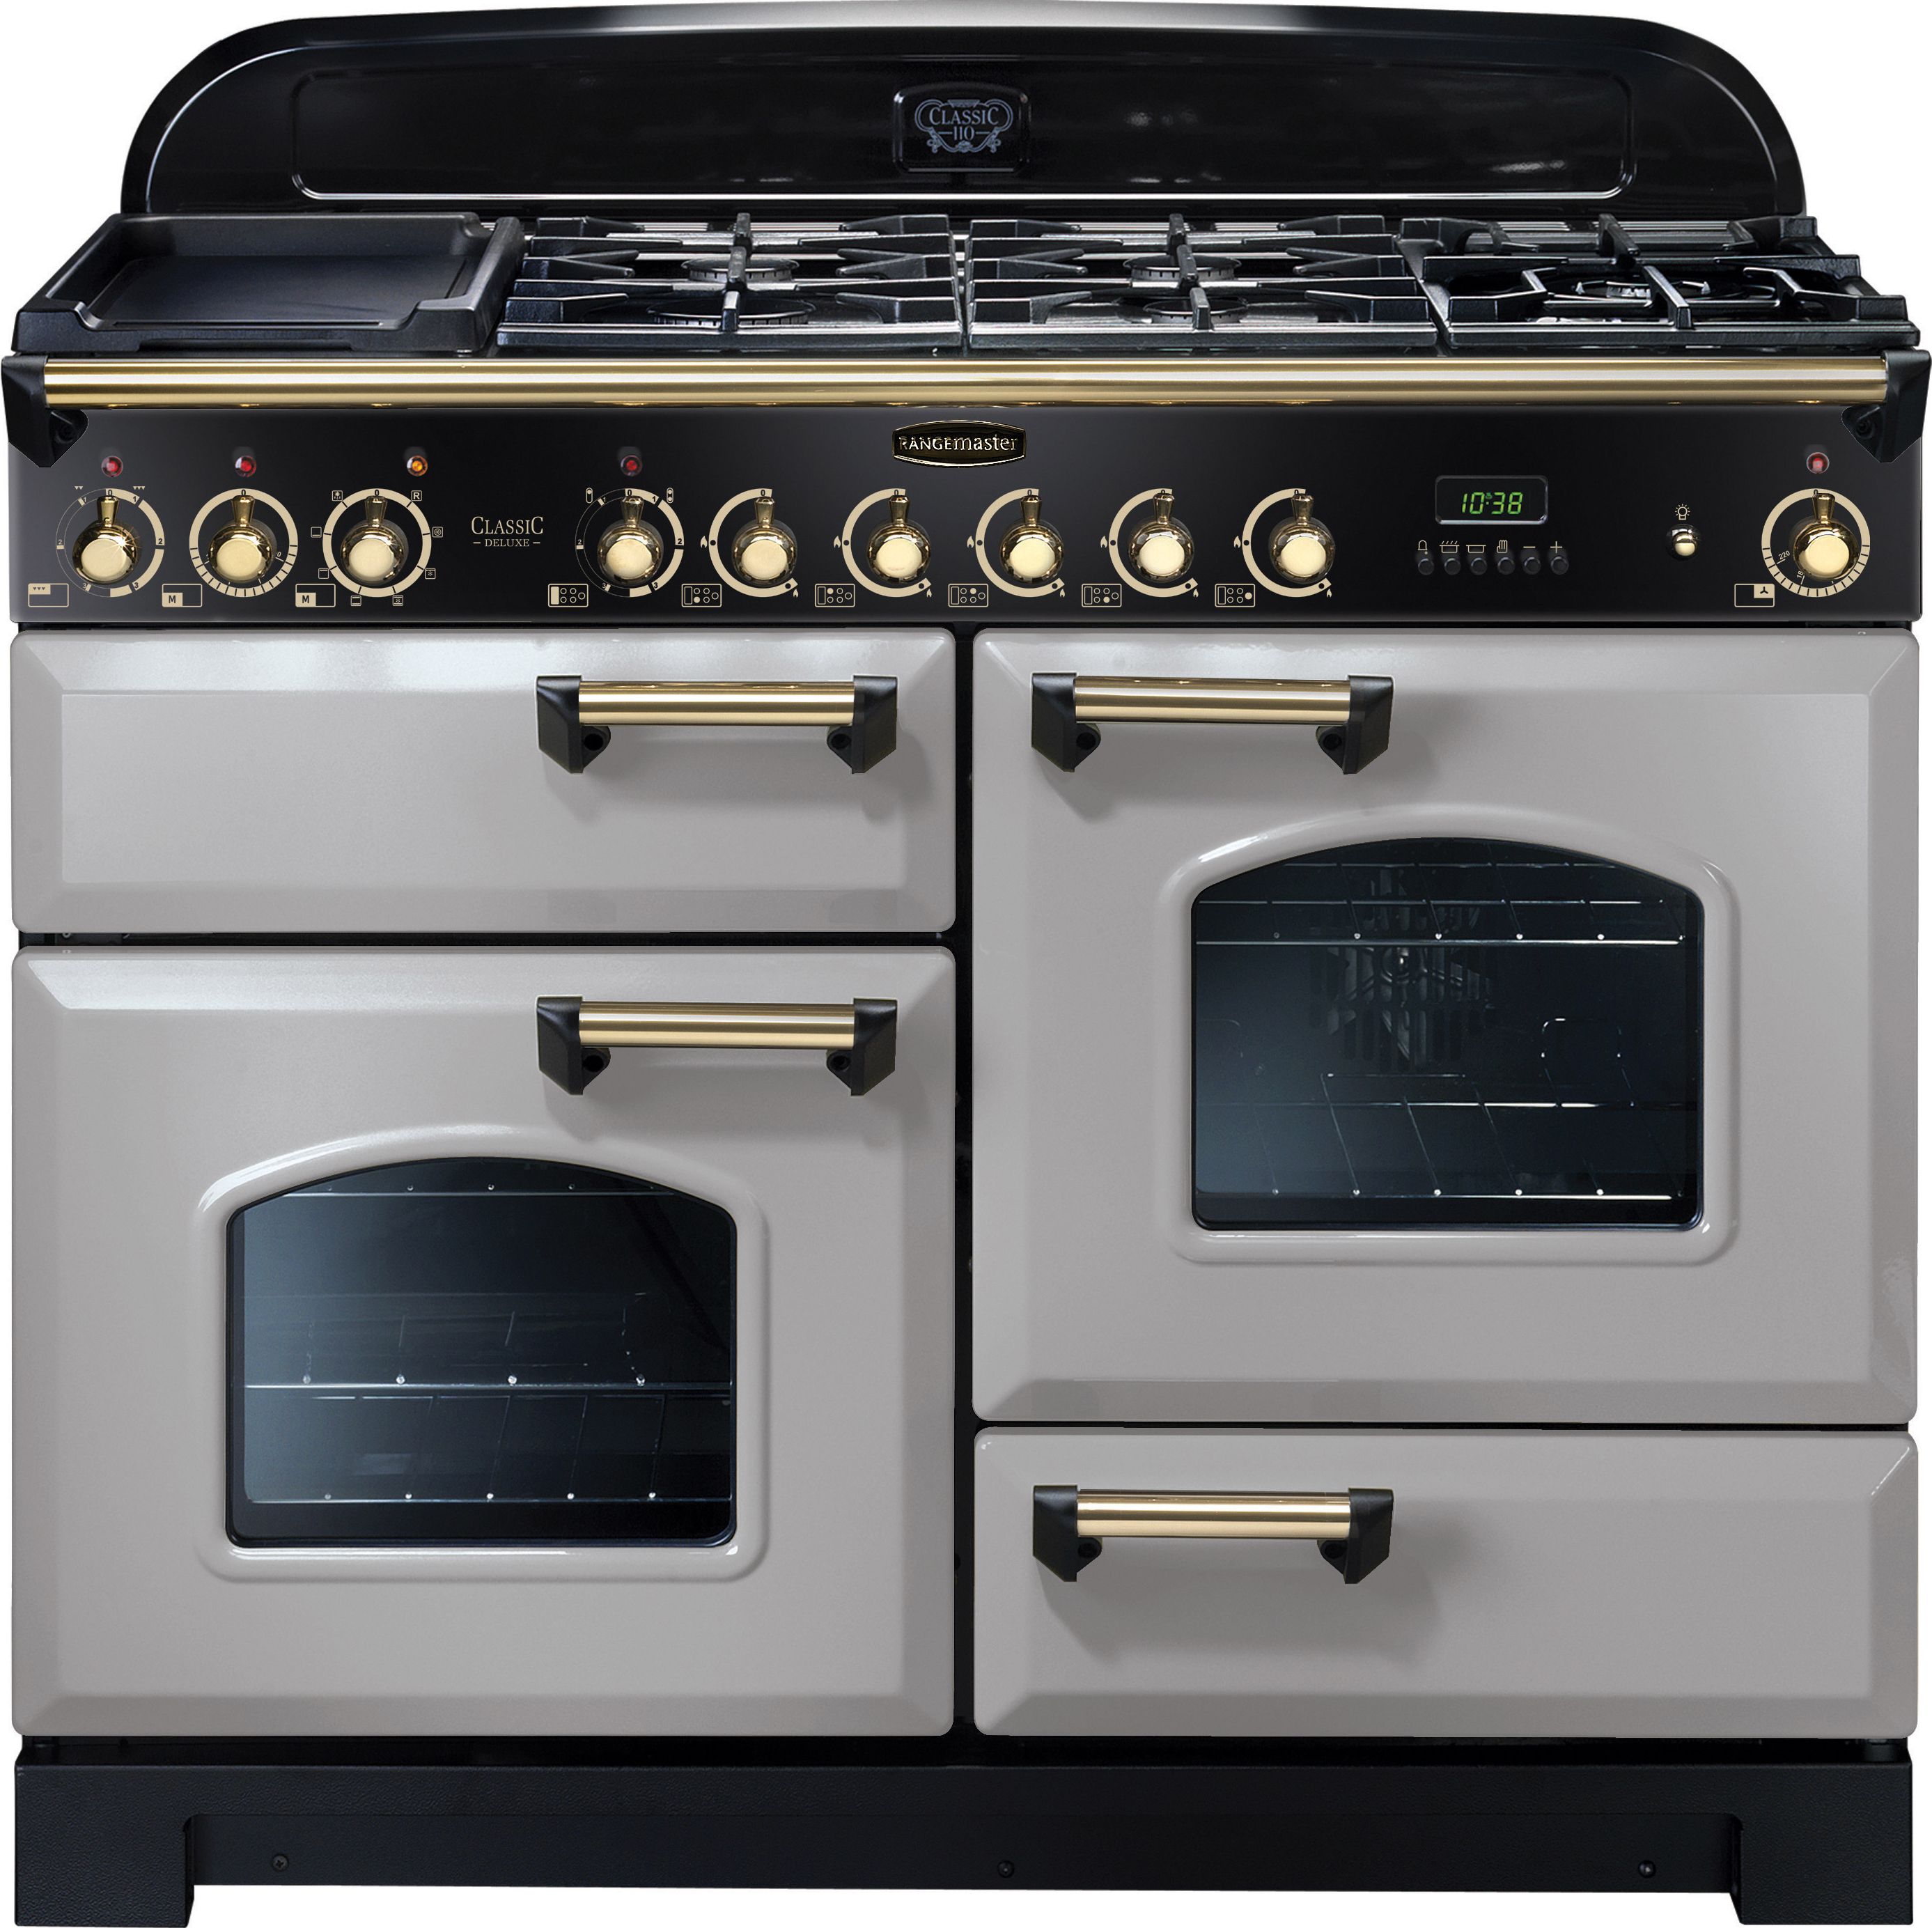 Rangemaster Classic Deluxe CDL110DFFRP/B 110cm Dual Fuel Range Cooker - Royal Pearl / Brass - A/A Rated, Grey